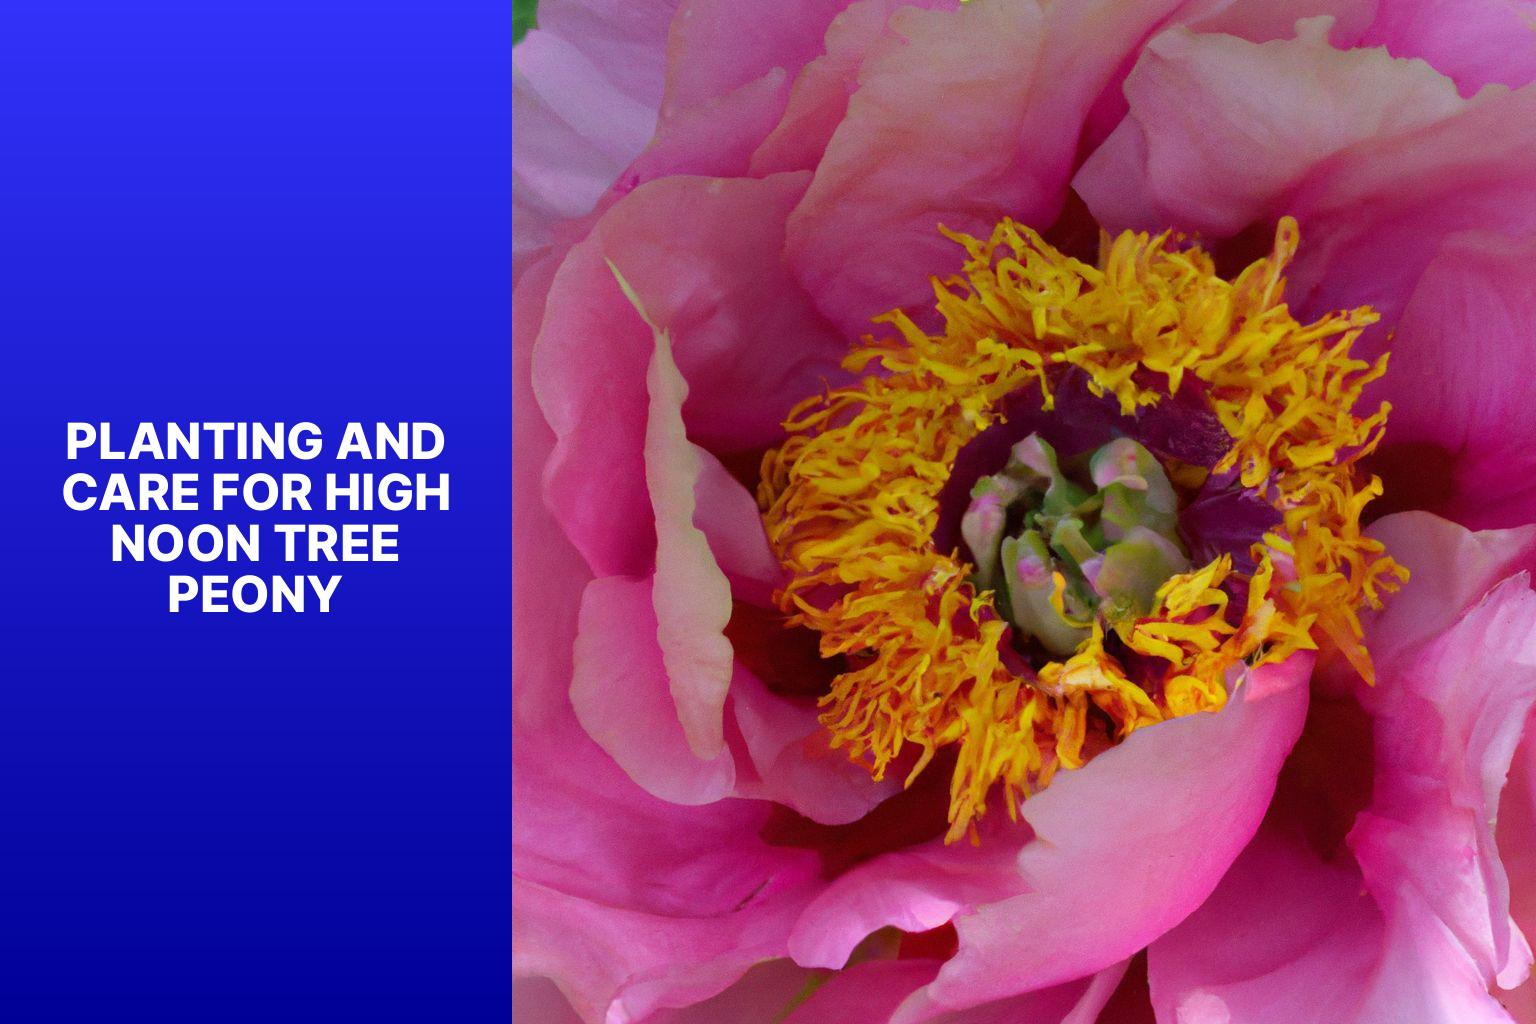 Planting and Care for High Noon Tree Peony - high noon tree peony 